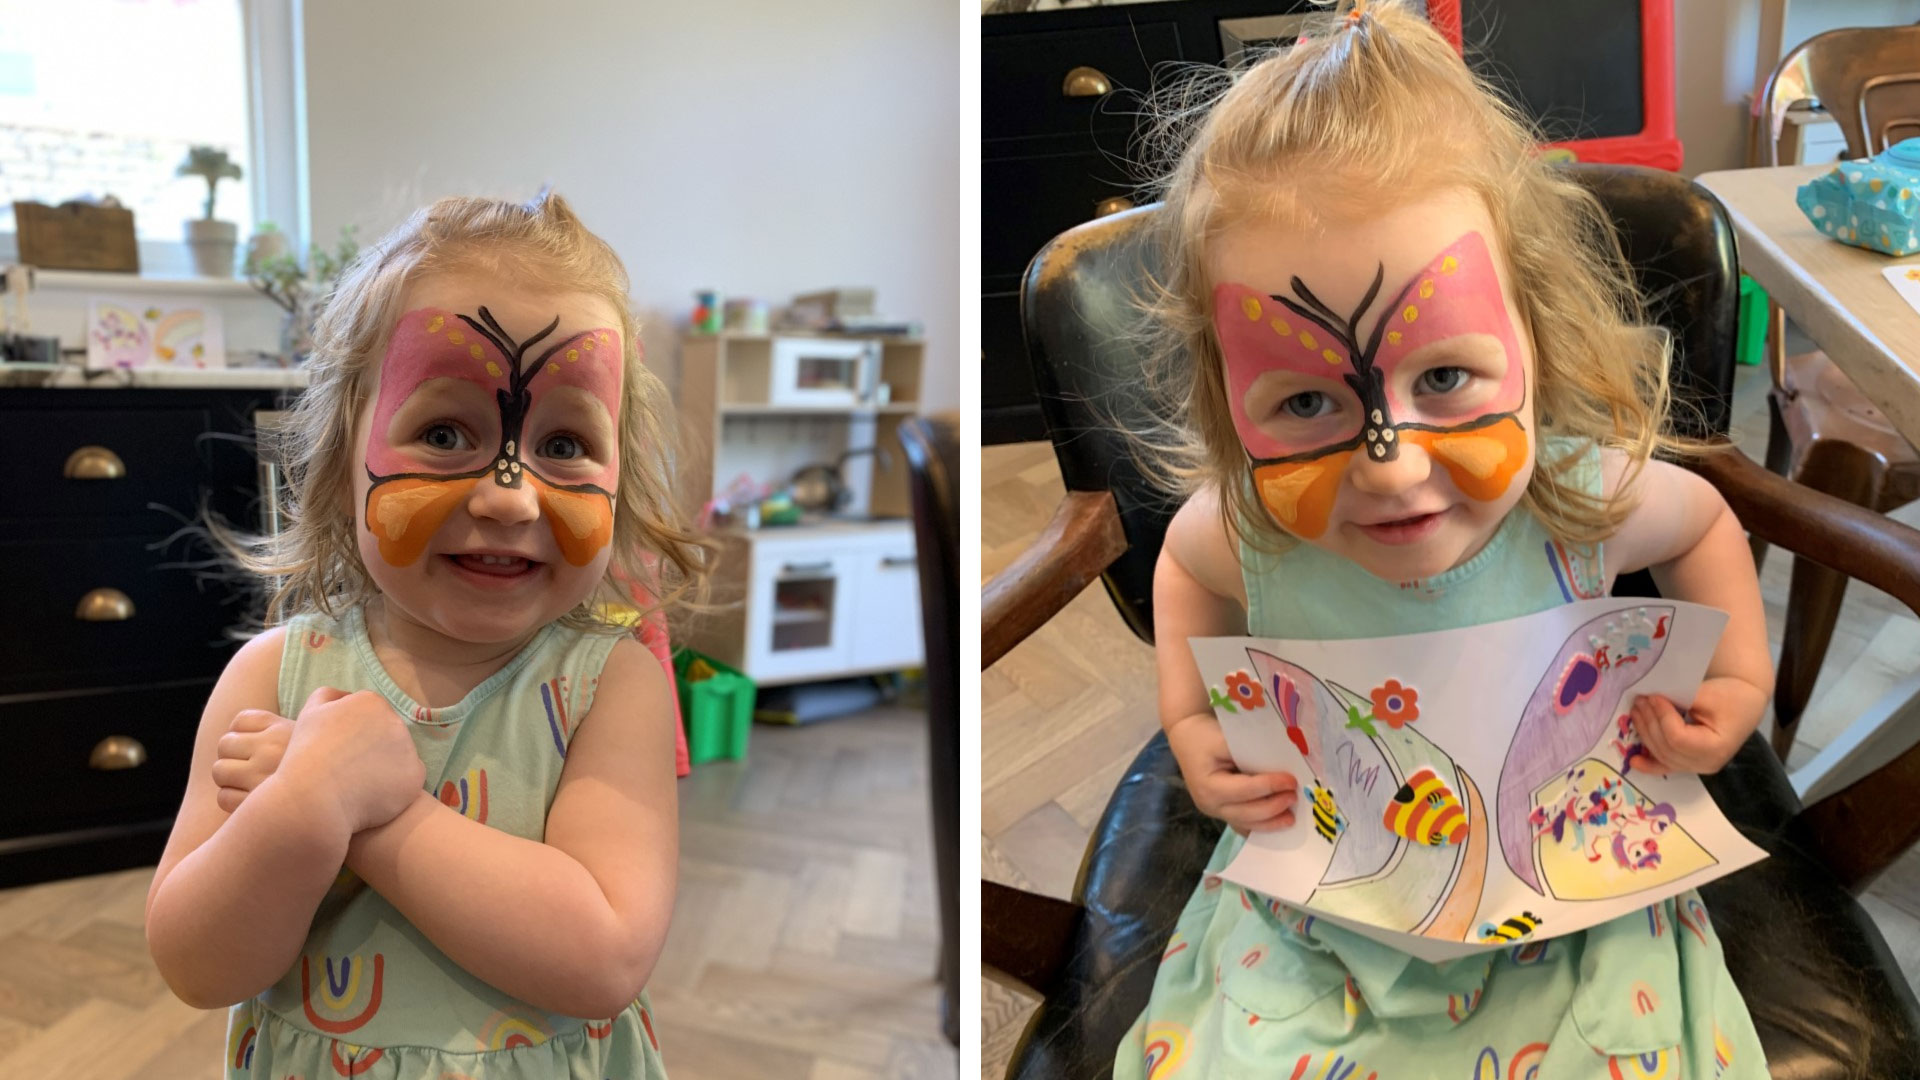 Two images of a small child with butterfly face paint. In one of the images she is holding a picture of a butterfly